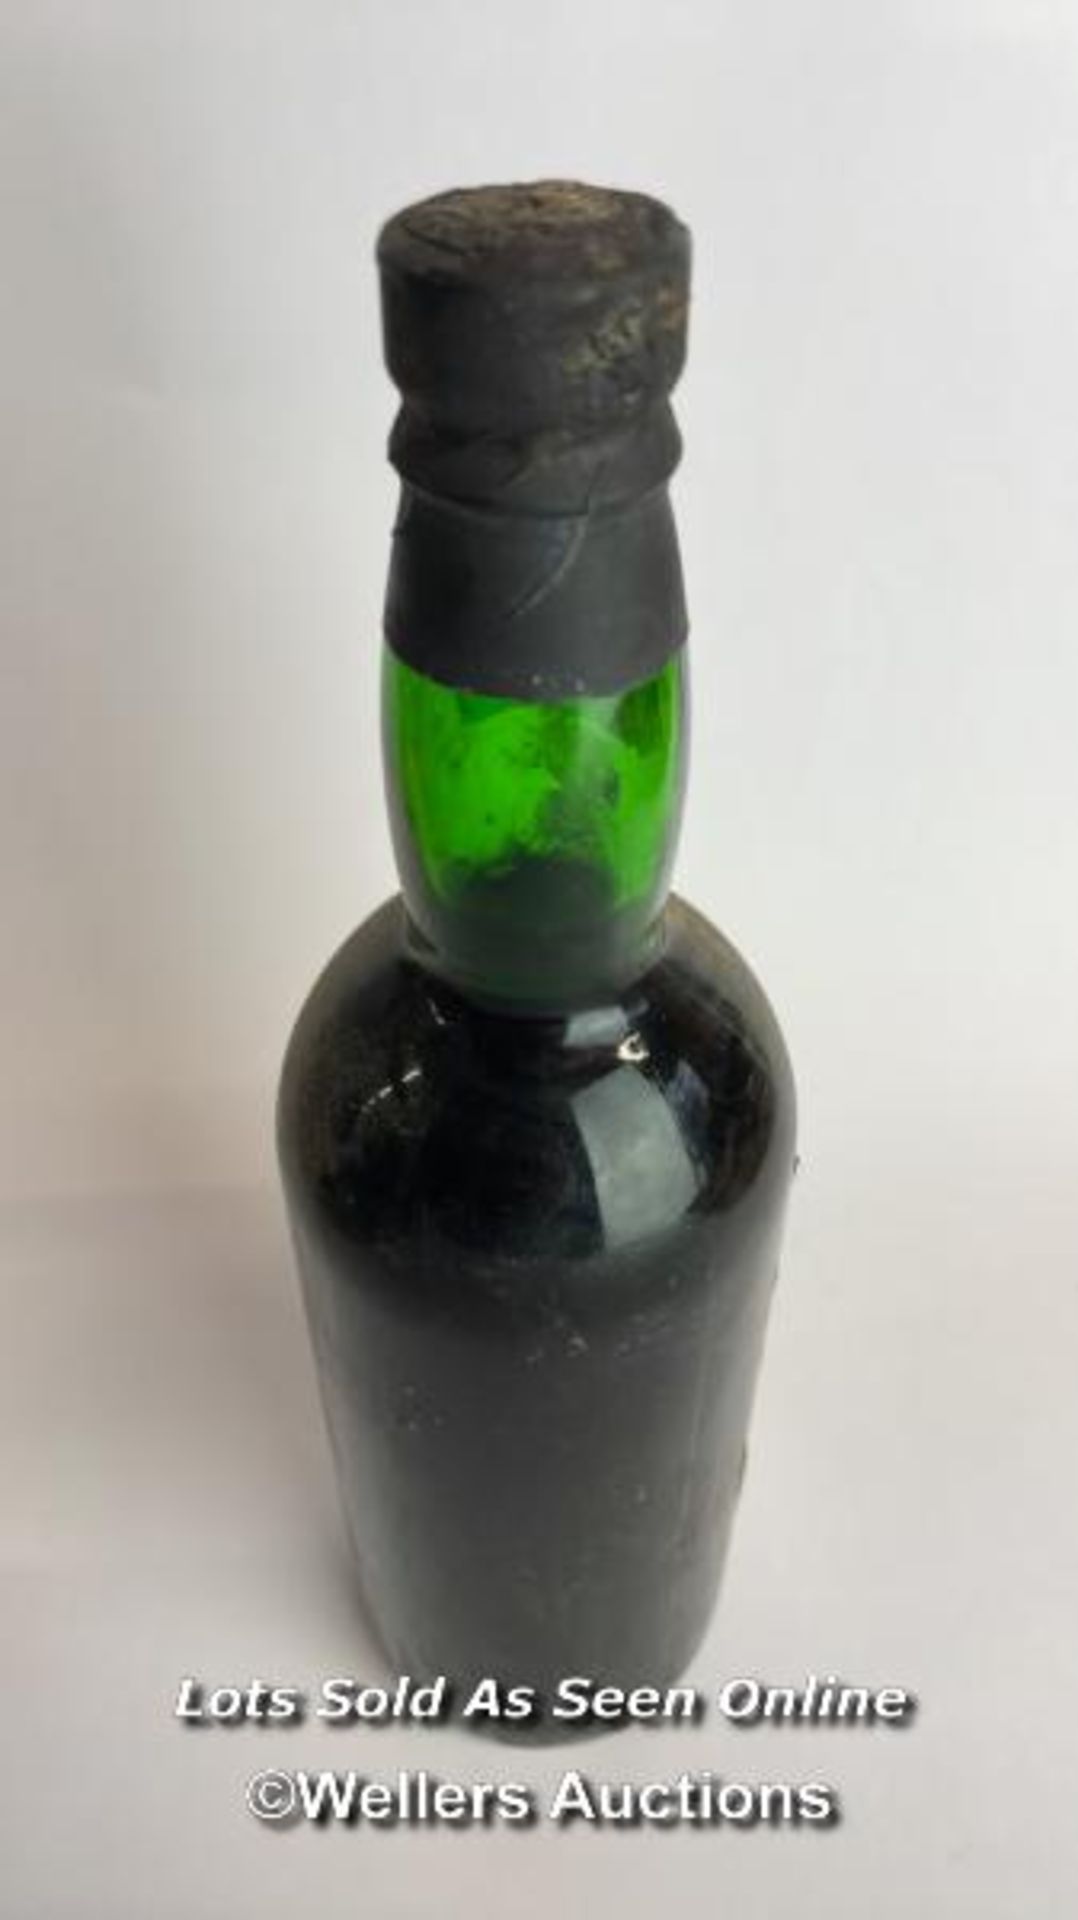 1973 Fonesca's Finest Crusting Port, 26 fl oz / Please see images for fill level and general - Image 7 of 7